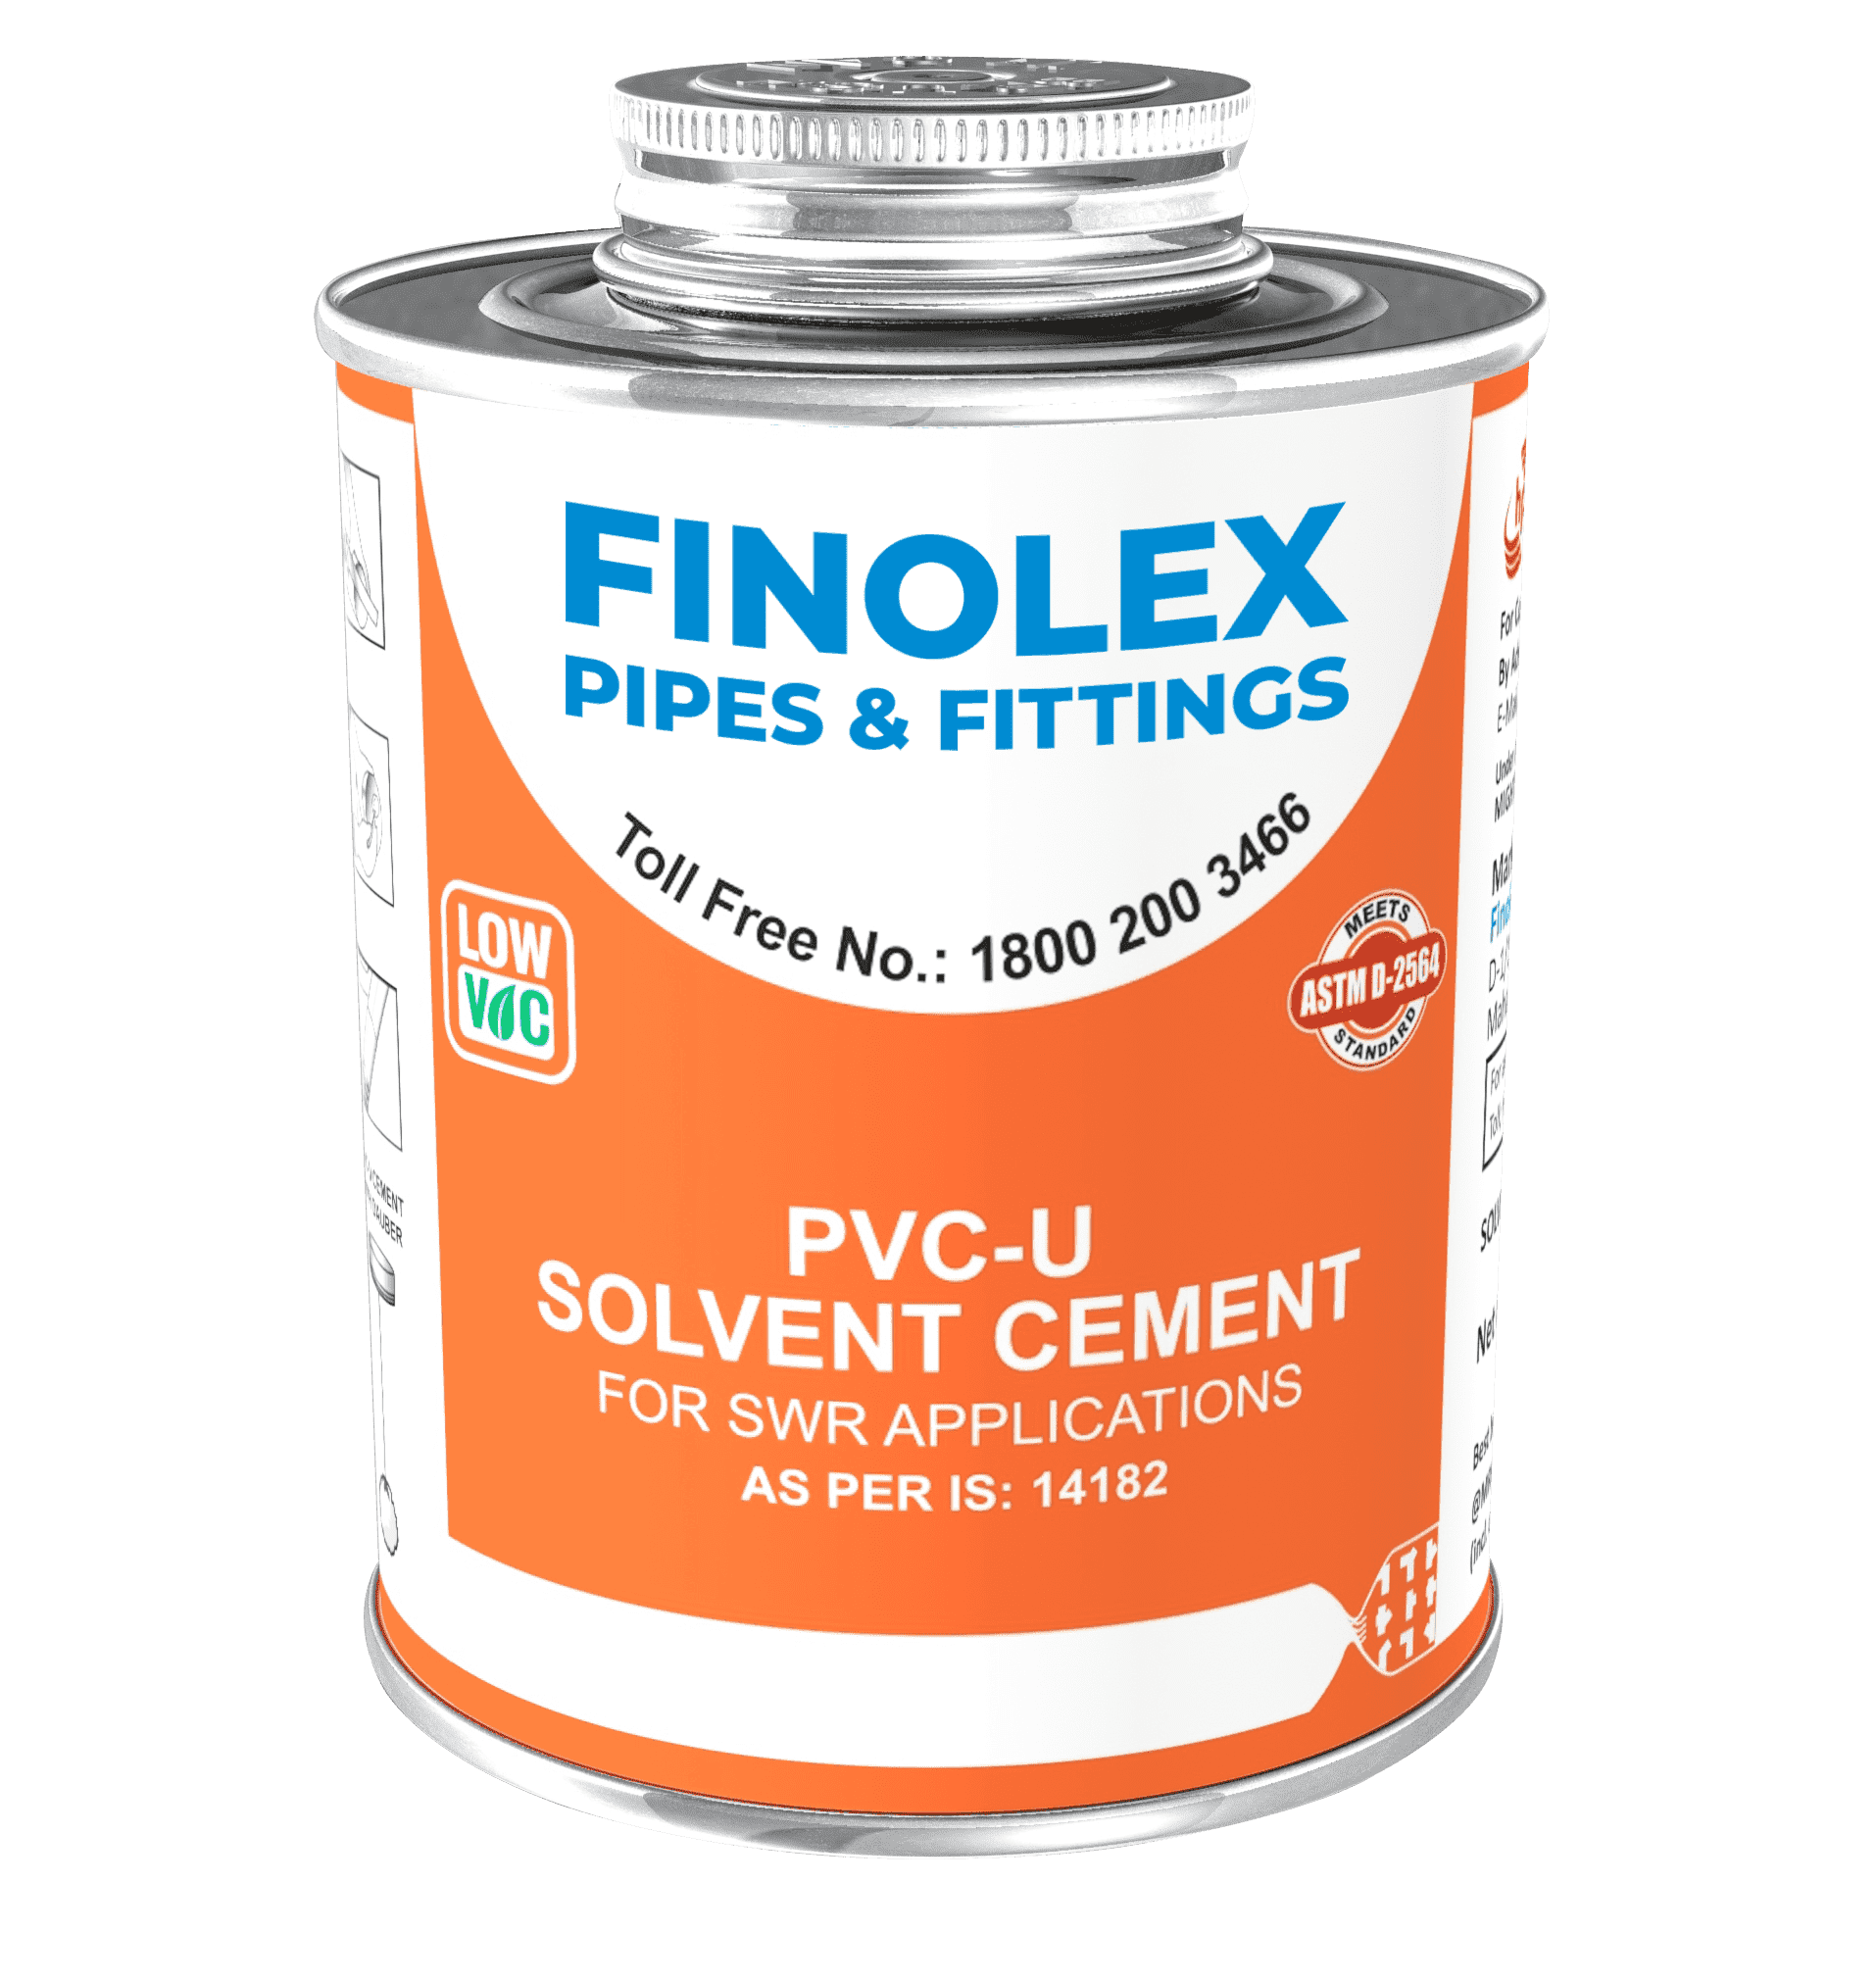 pvc-u solvent cement for swr applications